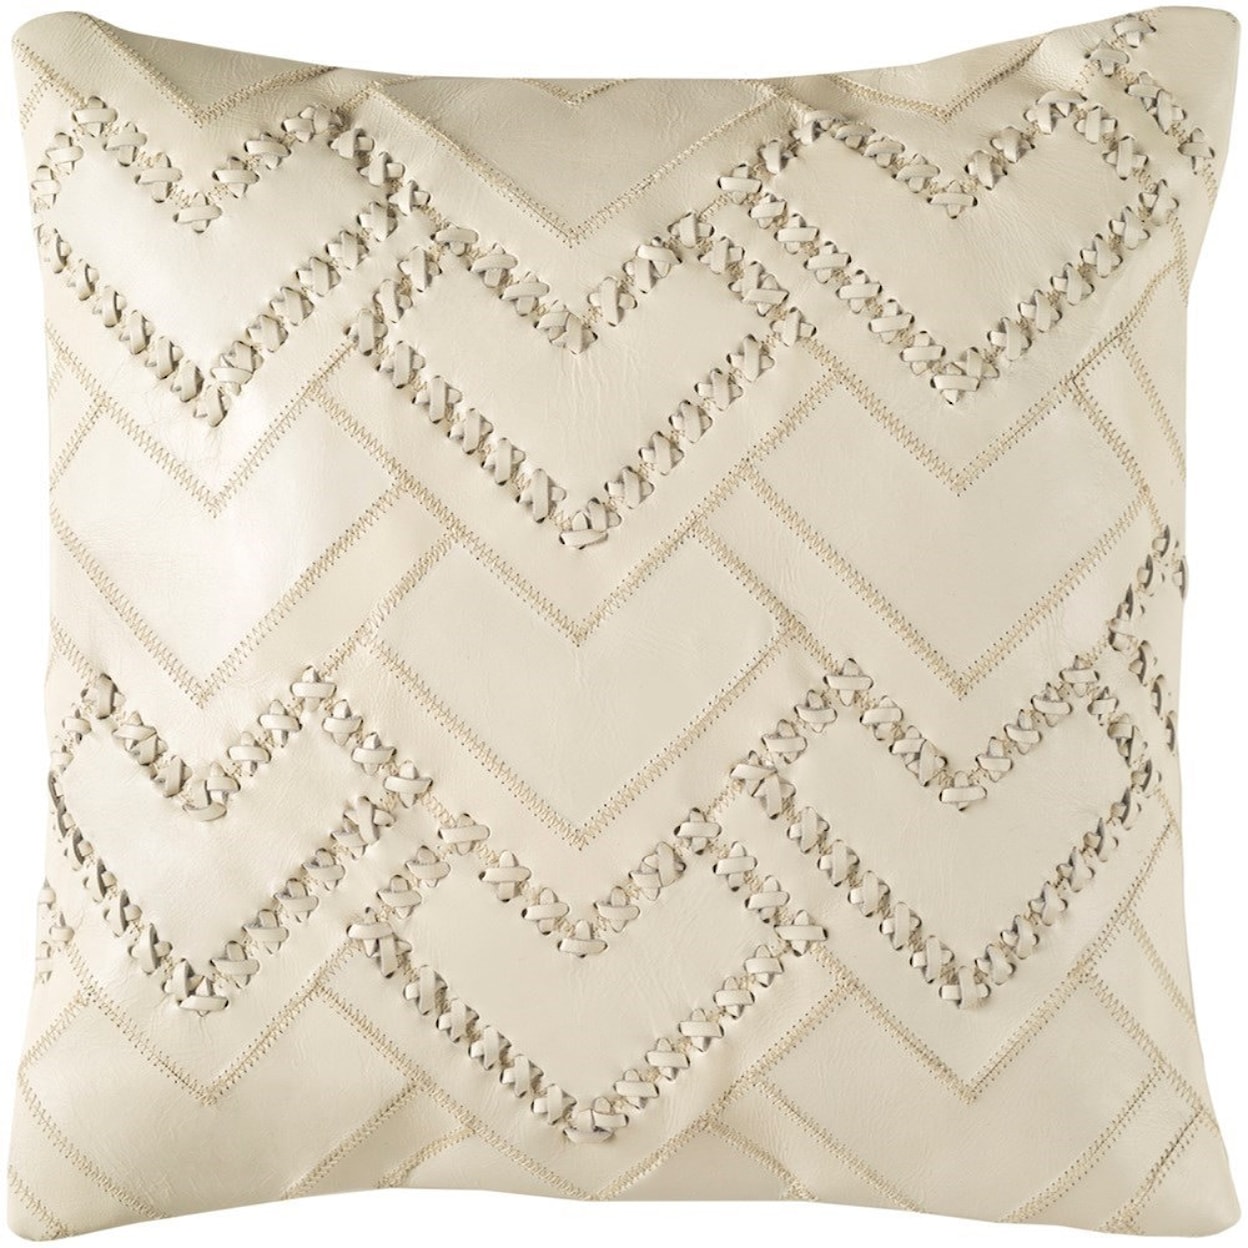 Ruby-Gordon Accents Bedford 18 x 18 x 4 Polyester Throw Pillow